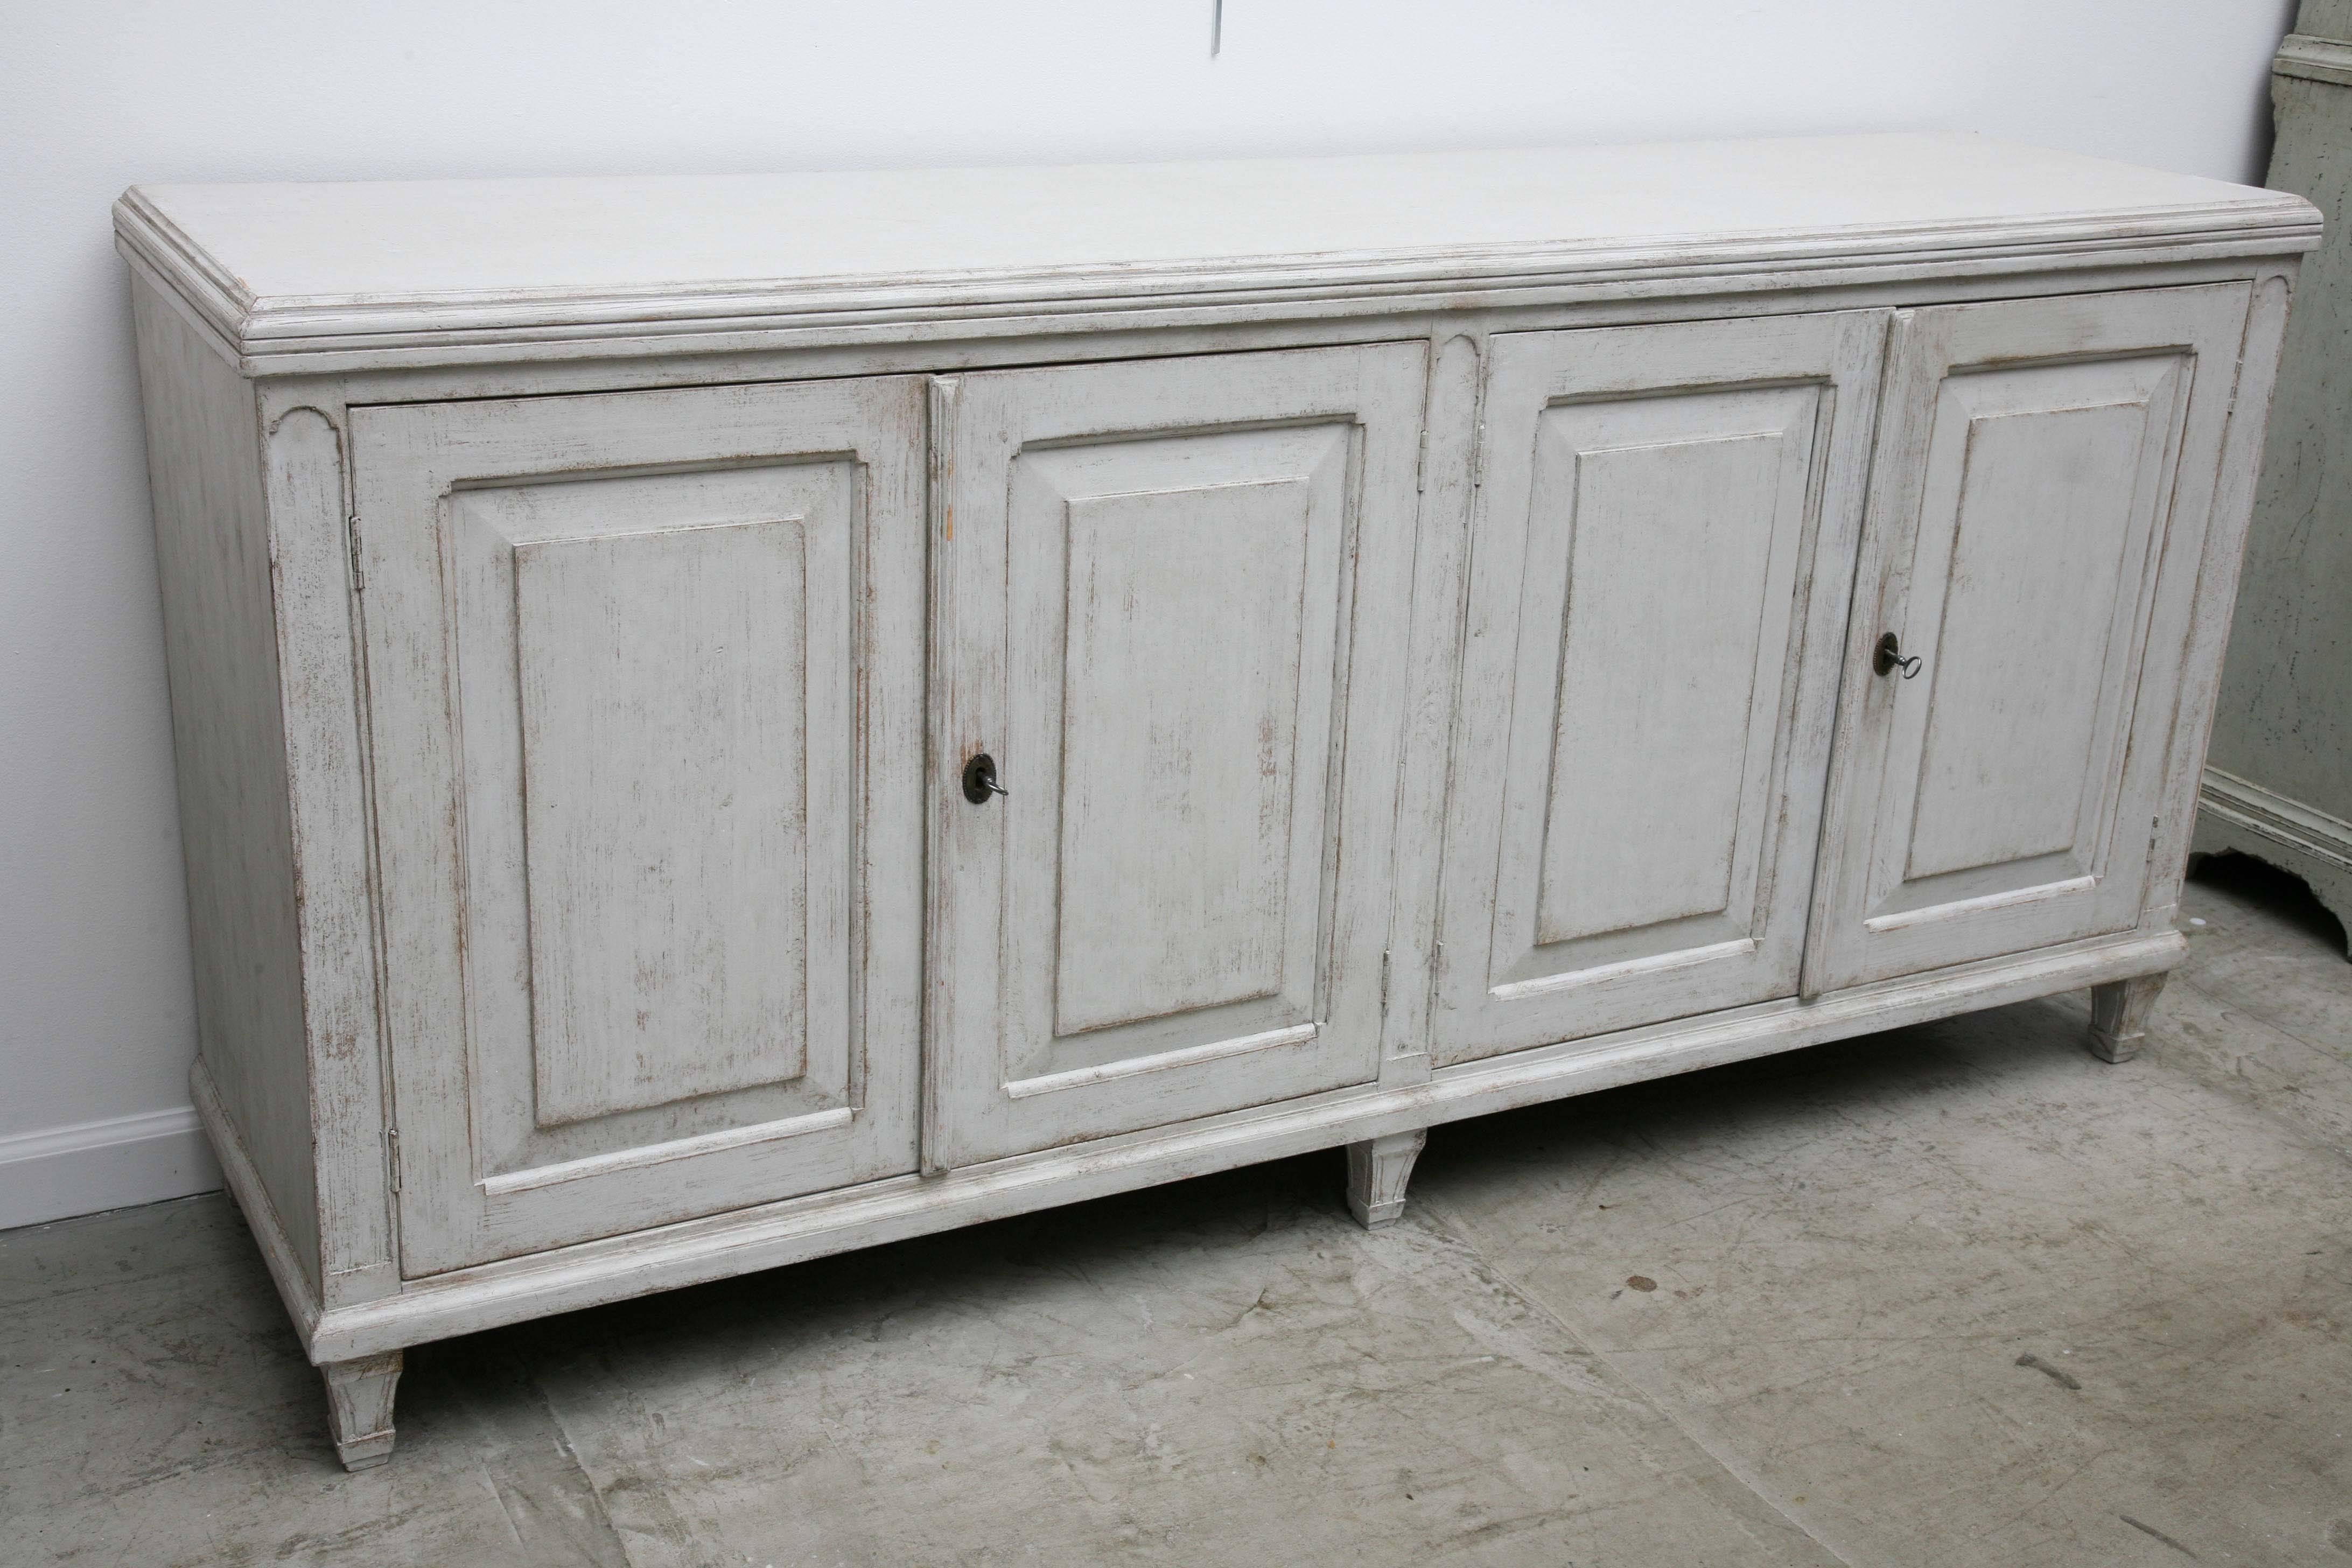 19th century unusual large Swedish antique four door painted sideboard, with
raised panel doors, crown moulding border around top border, one inside shelf,
Gustavian grey colour.